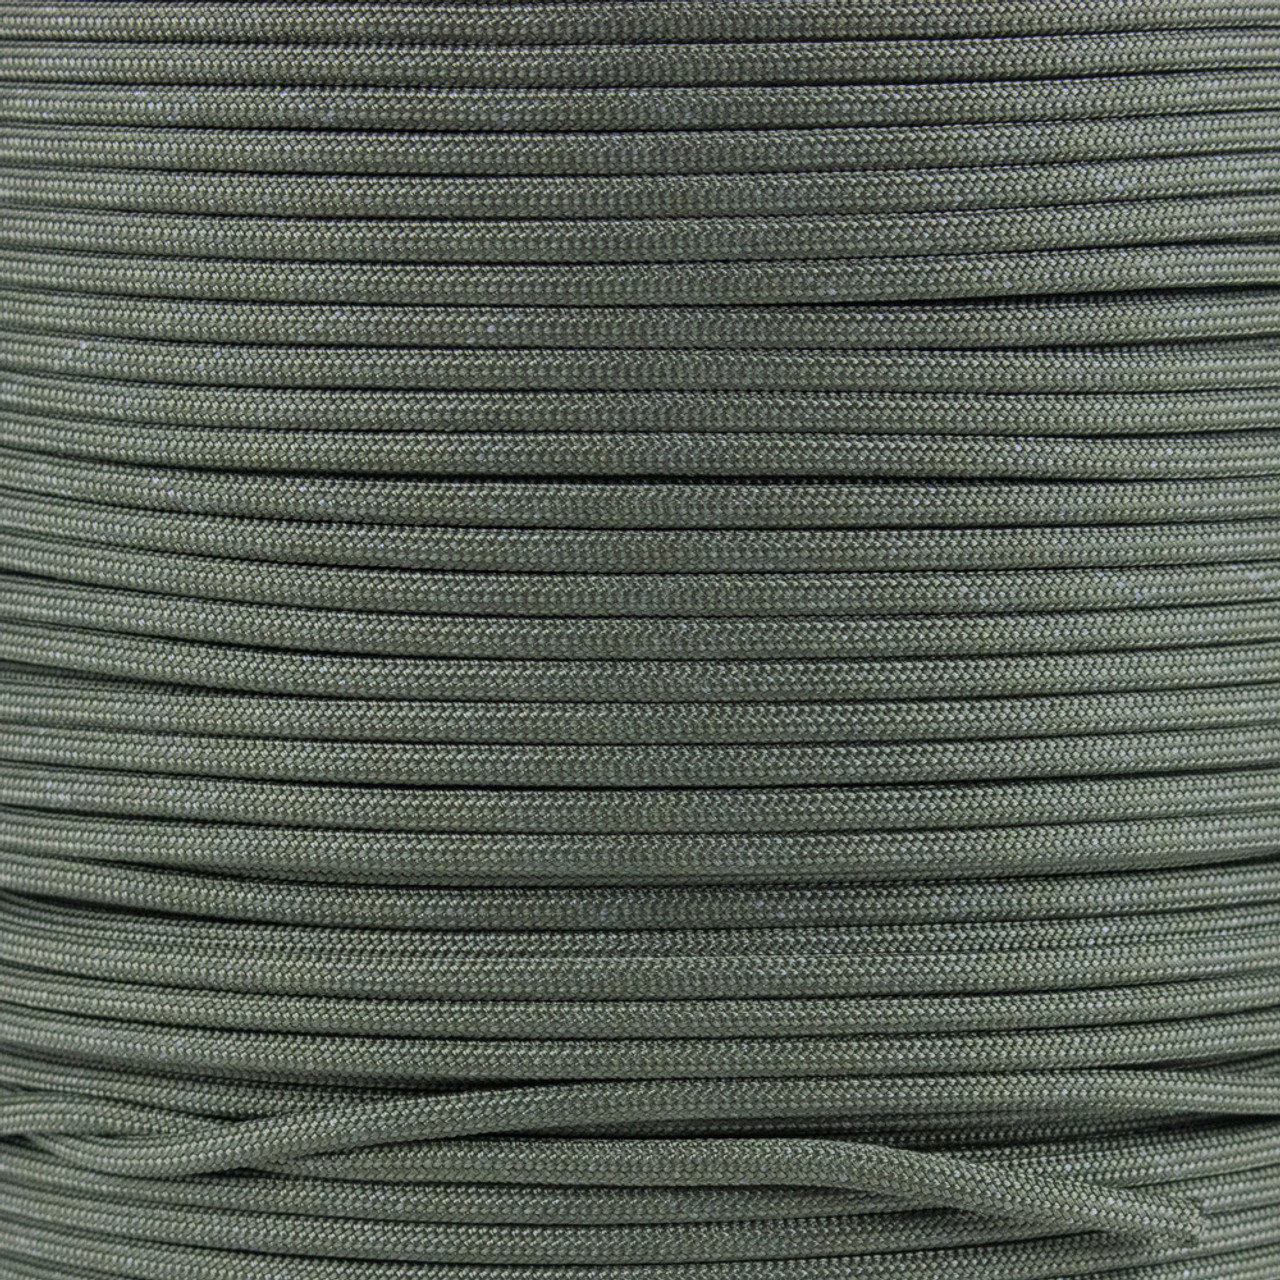 Foliage Green 550 Type III MIL-C Paracord